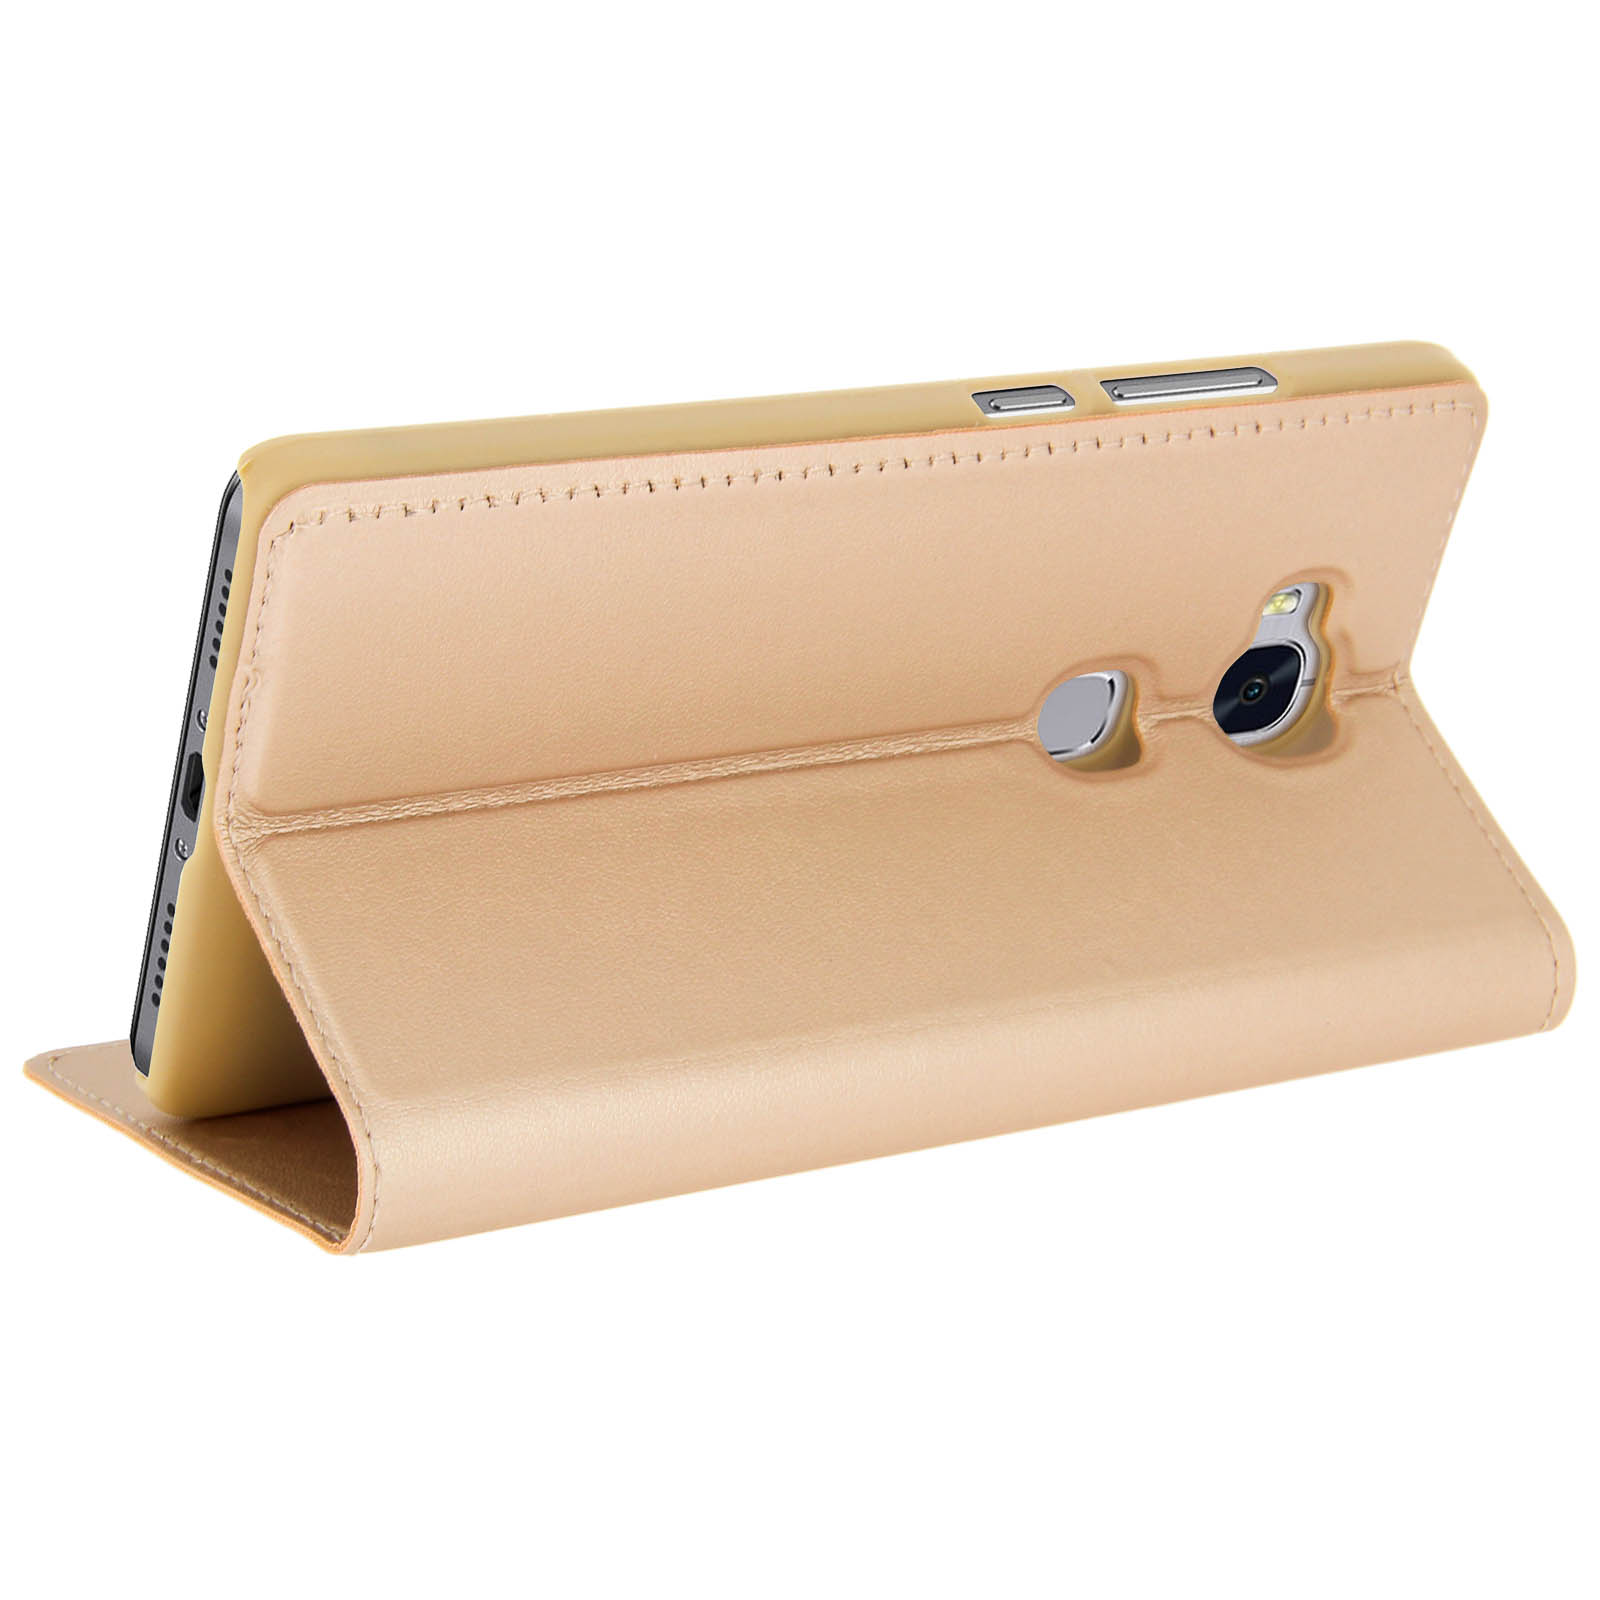 Series, Gold View Honor, Bookcover, Cover Honor 5X, CLAPPIO